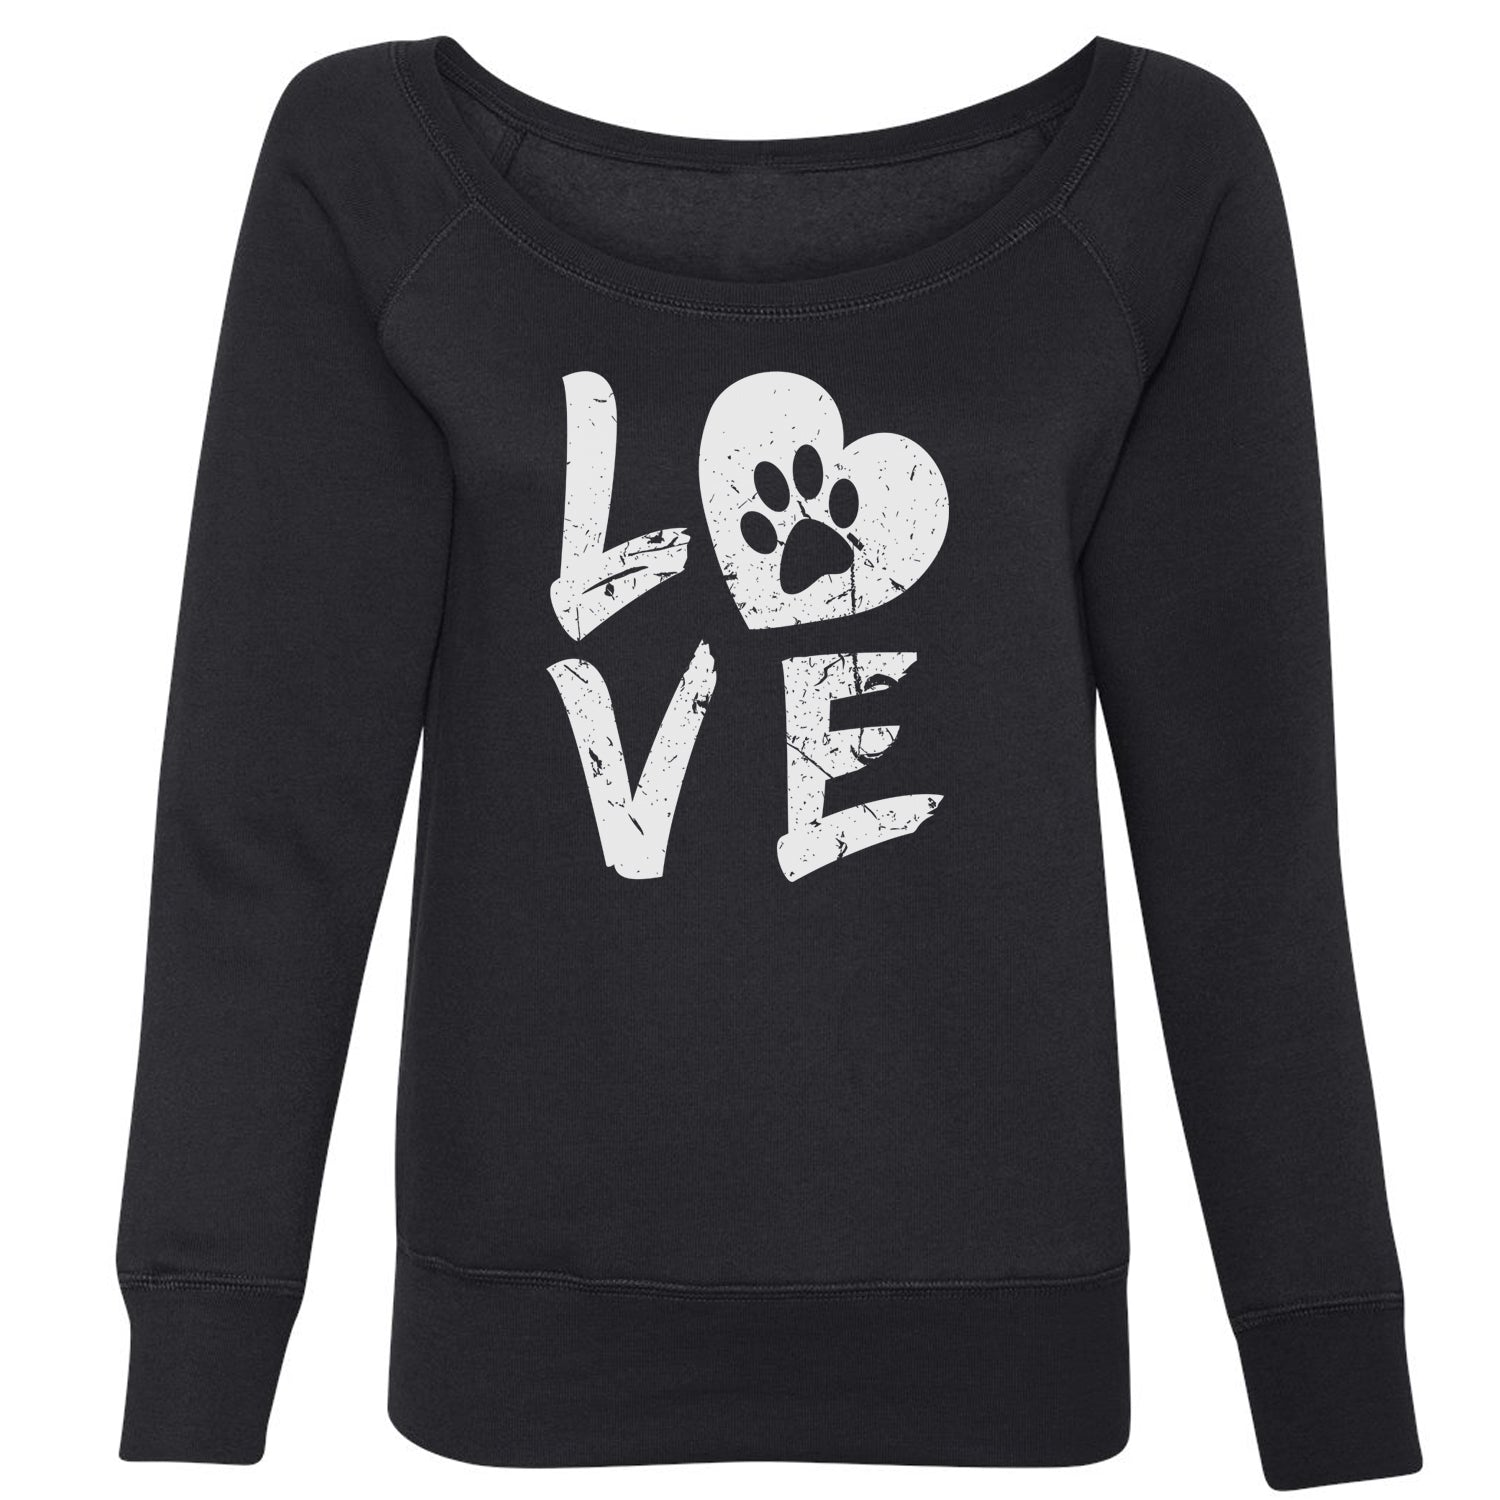 I Love My Dog Paw Print Slouchy Off Shoulder Oversized Sweatshirt dog, doggie, heart, love, lover, paw, print, puppy by Expression Tees